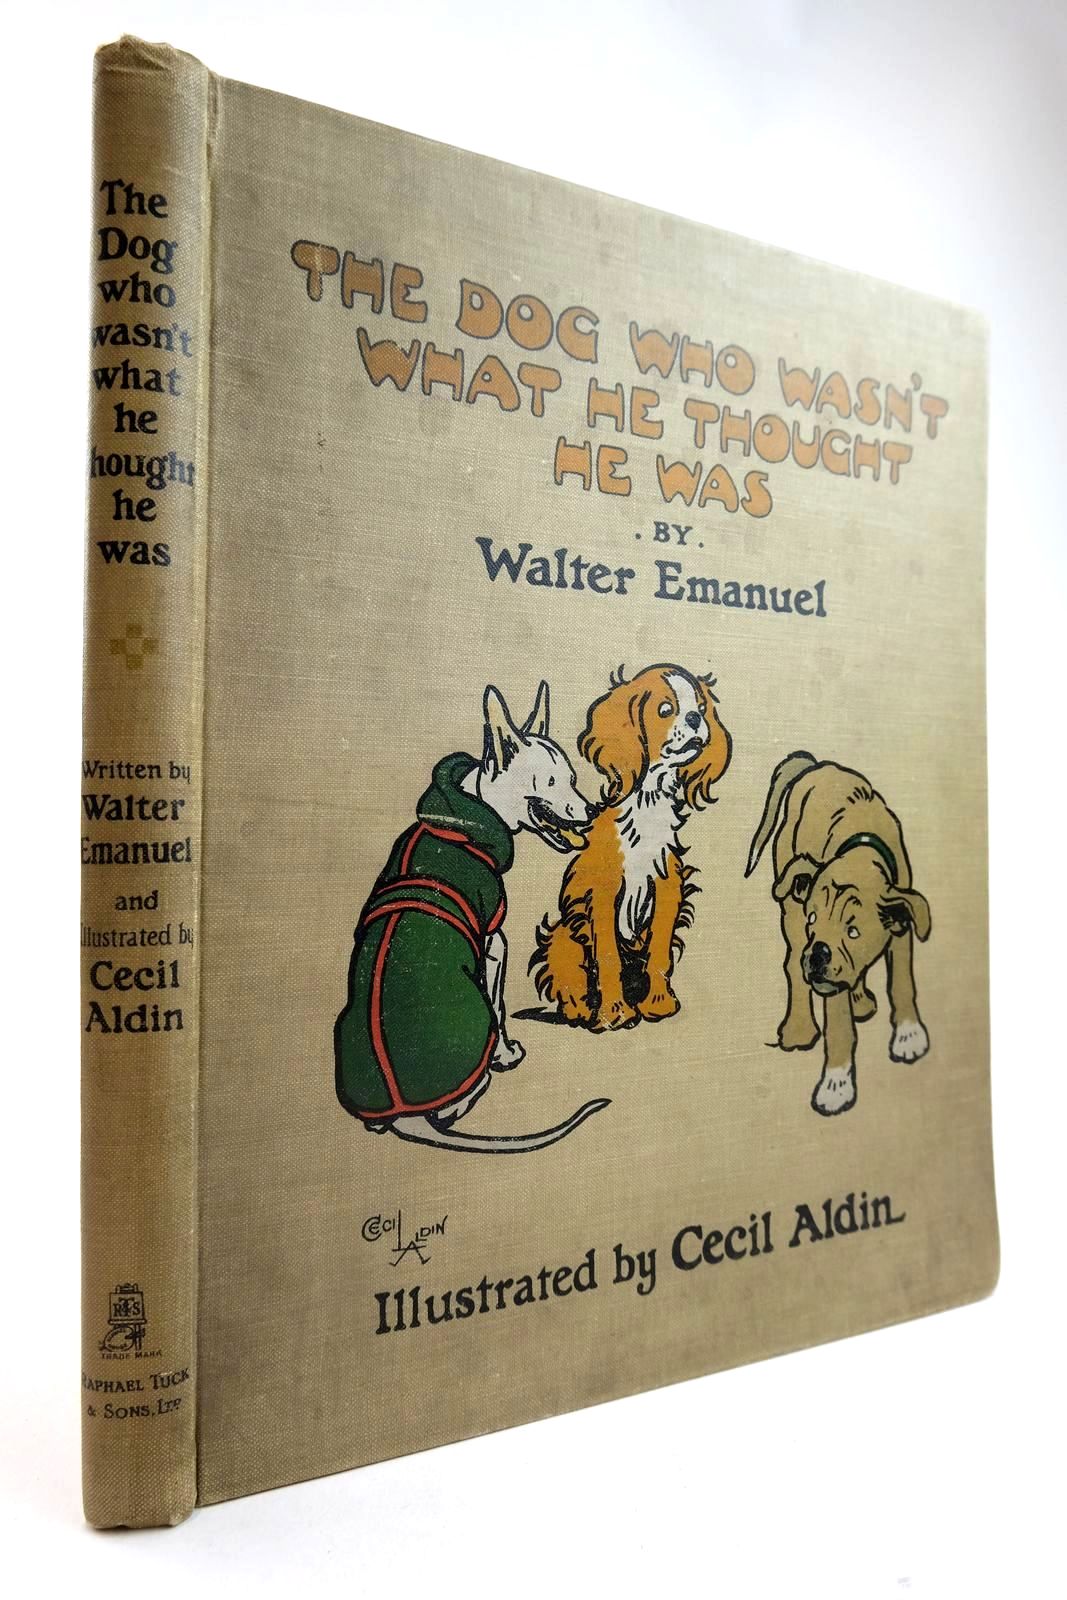 Photo of THE DOG WHO WASN'T WHAT HE THOUGHT HE WAS written by Emanuel, Walter illustrated by Aldin, Cecil published by Raphael Tuck & Sons Ltd. (STOCK CODE: 2133293)  for sale by Stella & Rose's Books